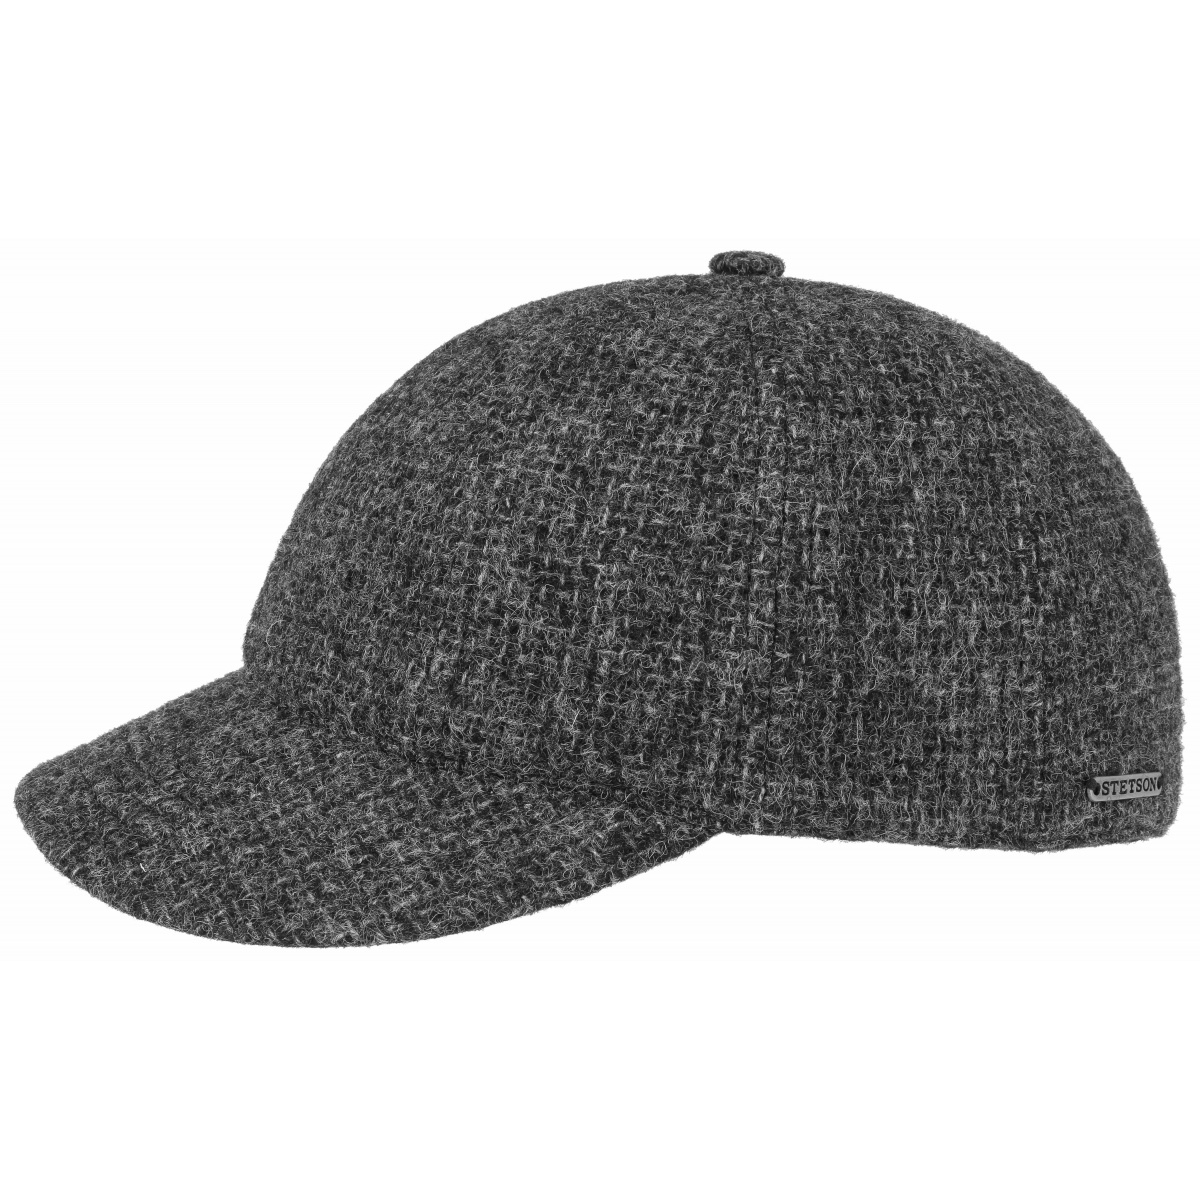 Casquette Baseball Tampa Anthracite en Laine- Stetson Reference : 8724